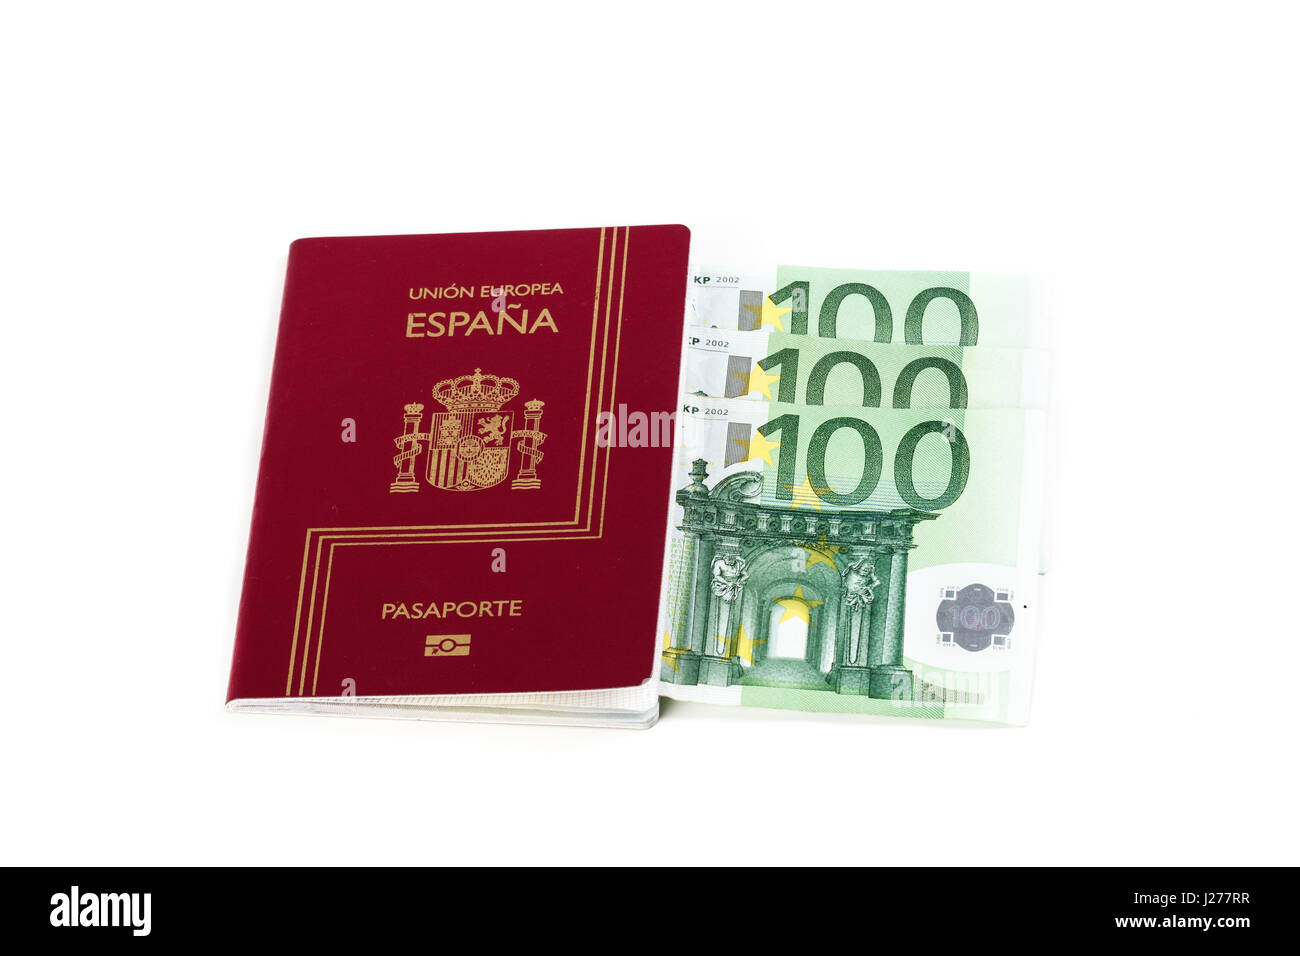 Spanish passport with european union currency banknotes on a white background Stock Photo